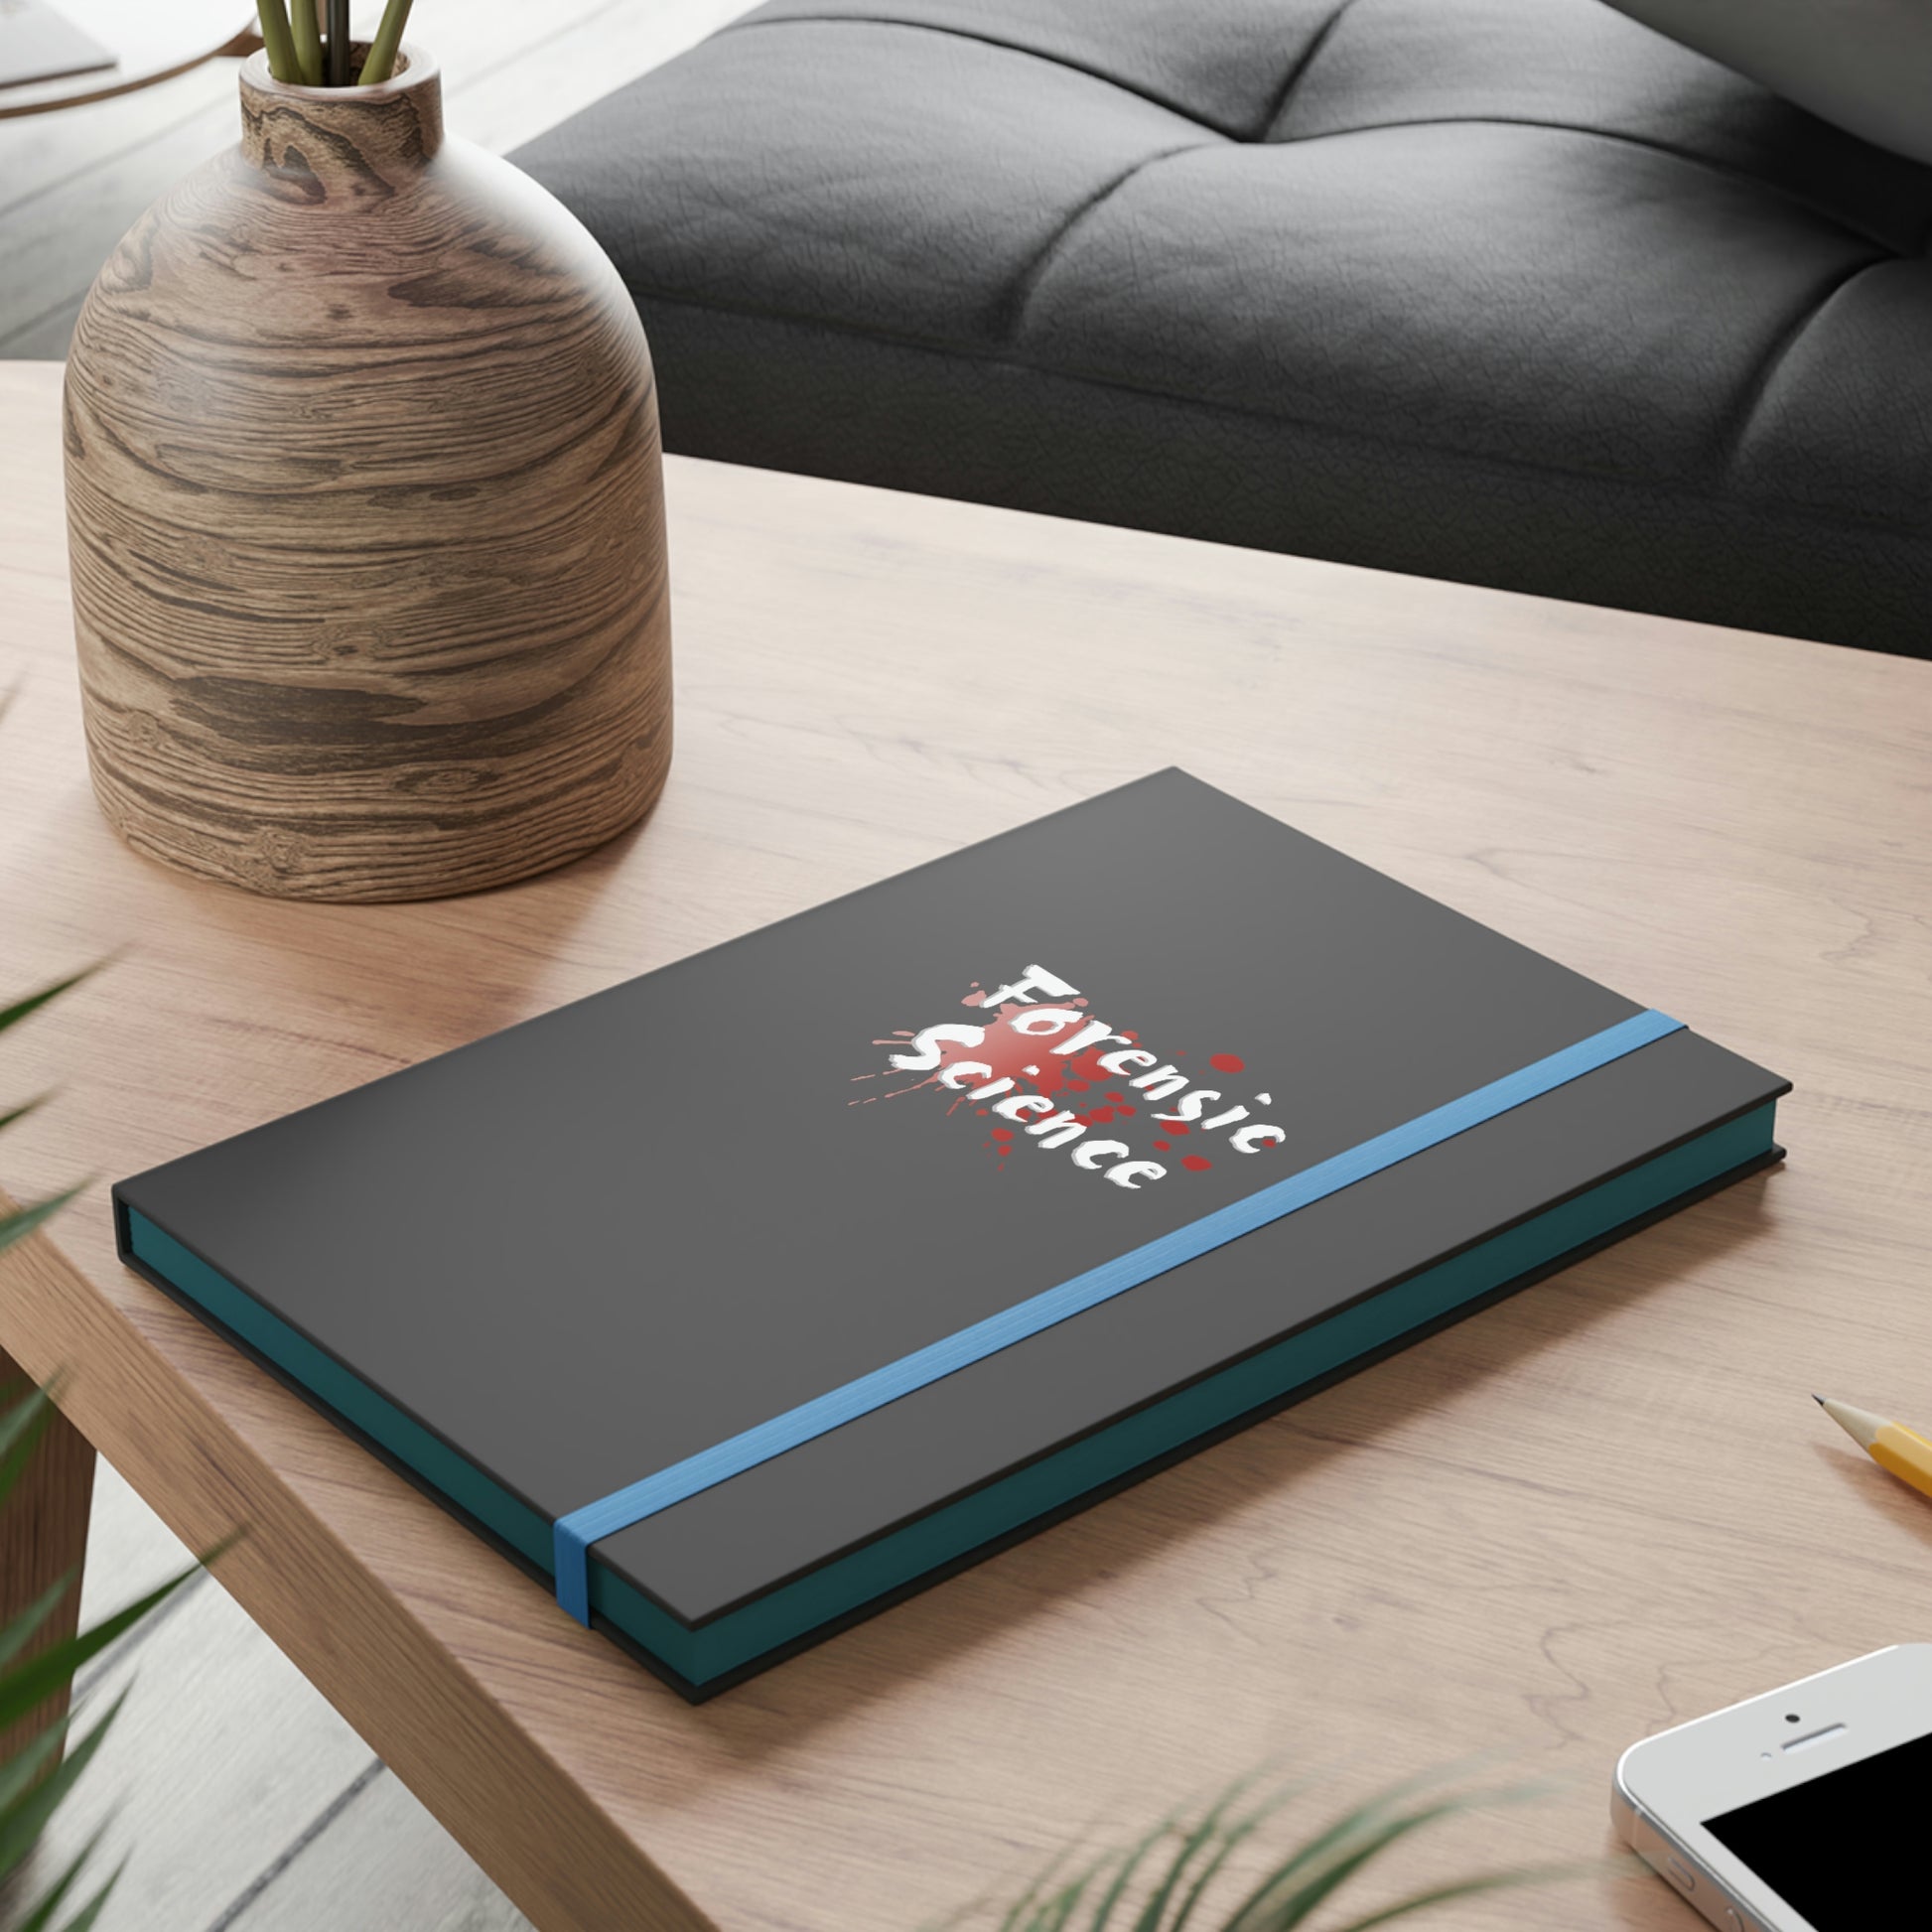 This original design forensic science note book is great for writing down memories, storing secrets, studying, and ticking off to-do lists—these hardcover Journal notebooks get the job done.